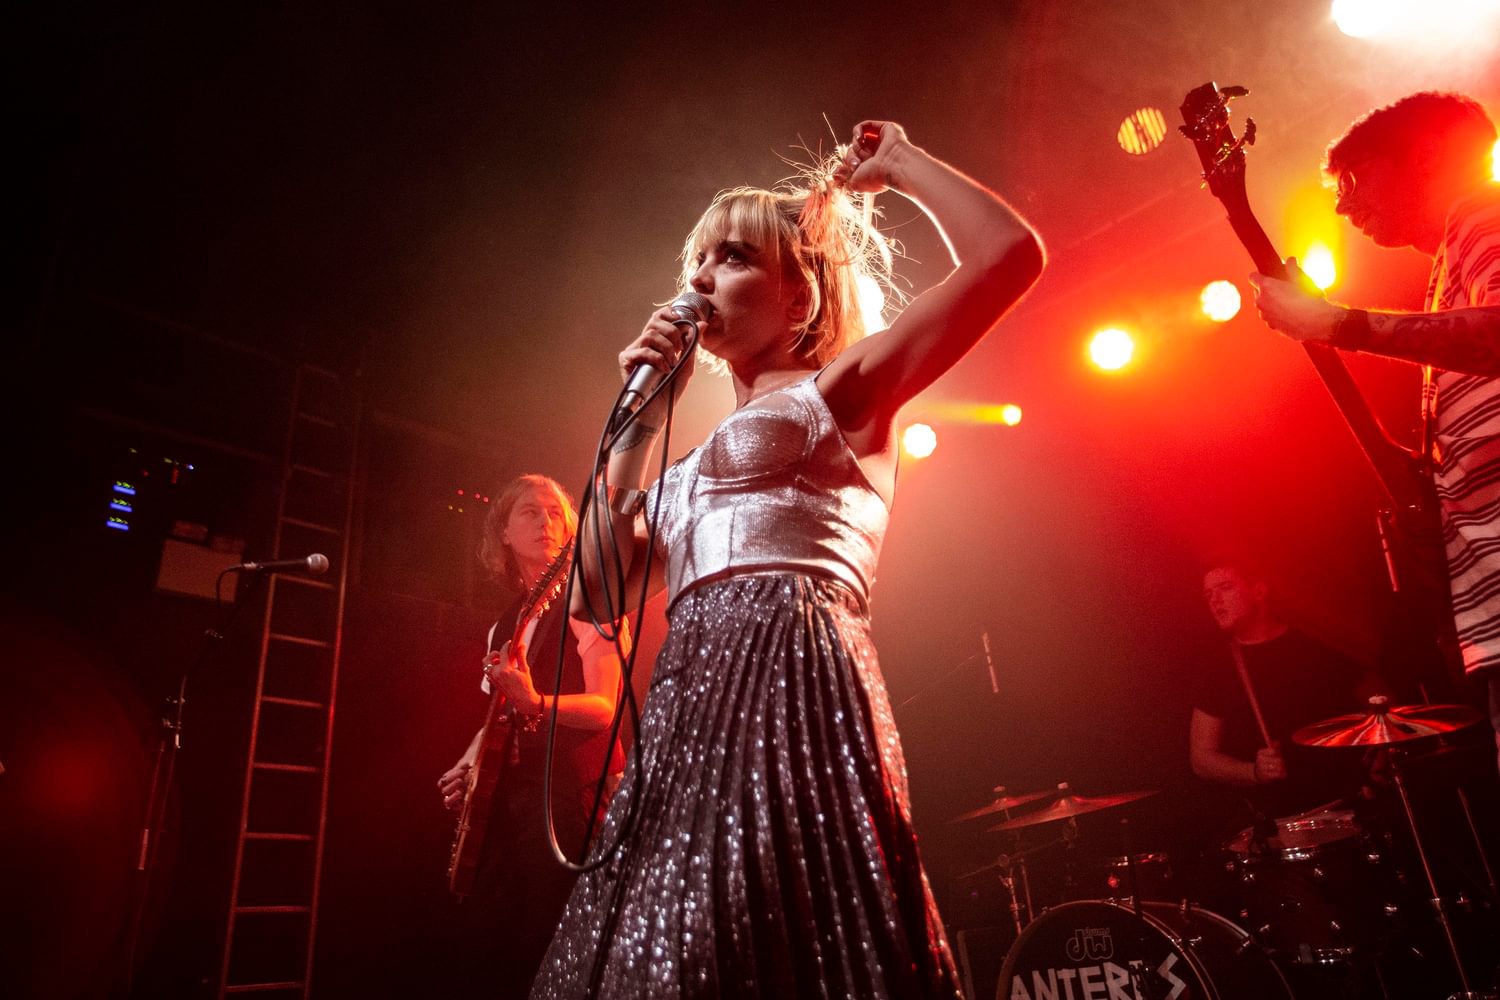 Anteros, Orchards, Another Sky for SXSW 2019